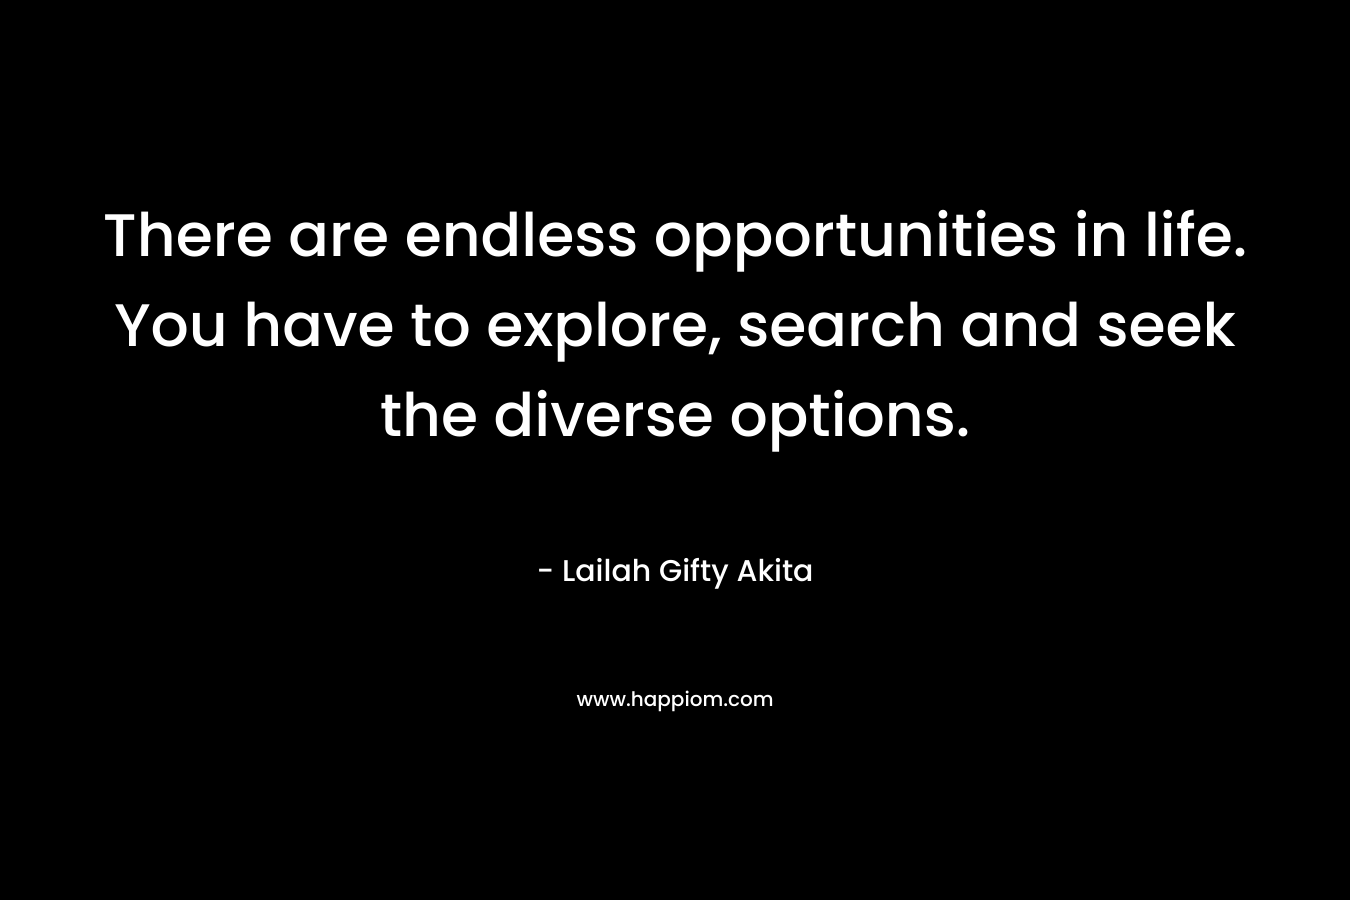 There are endless opportunities in life. You have to explore, search and seek the diverse options.